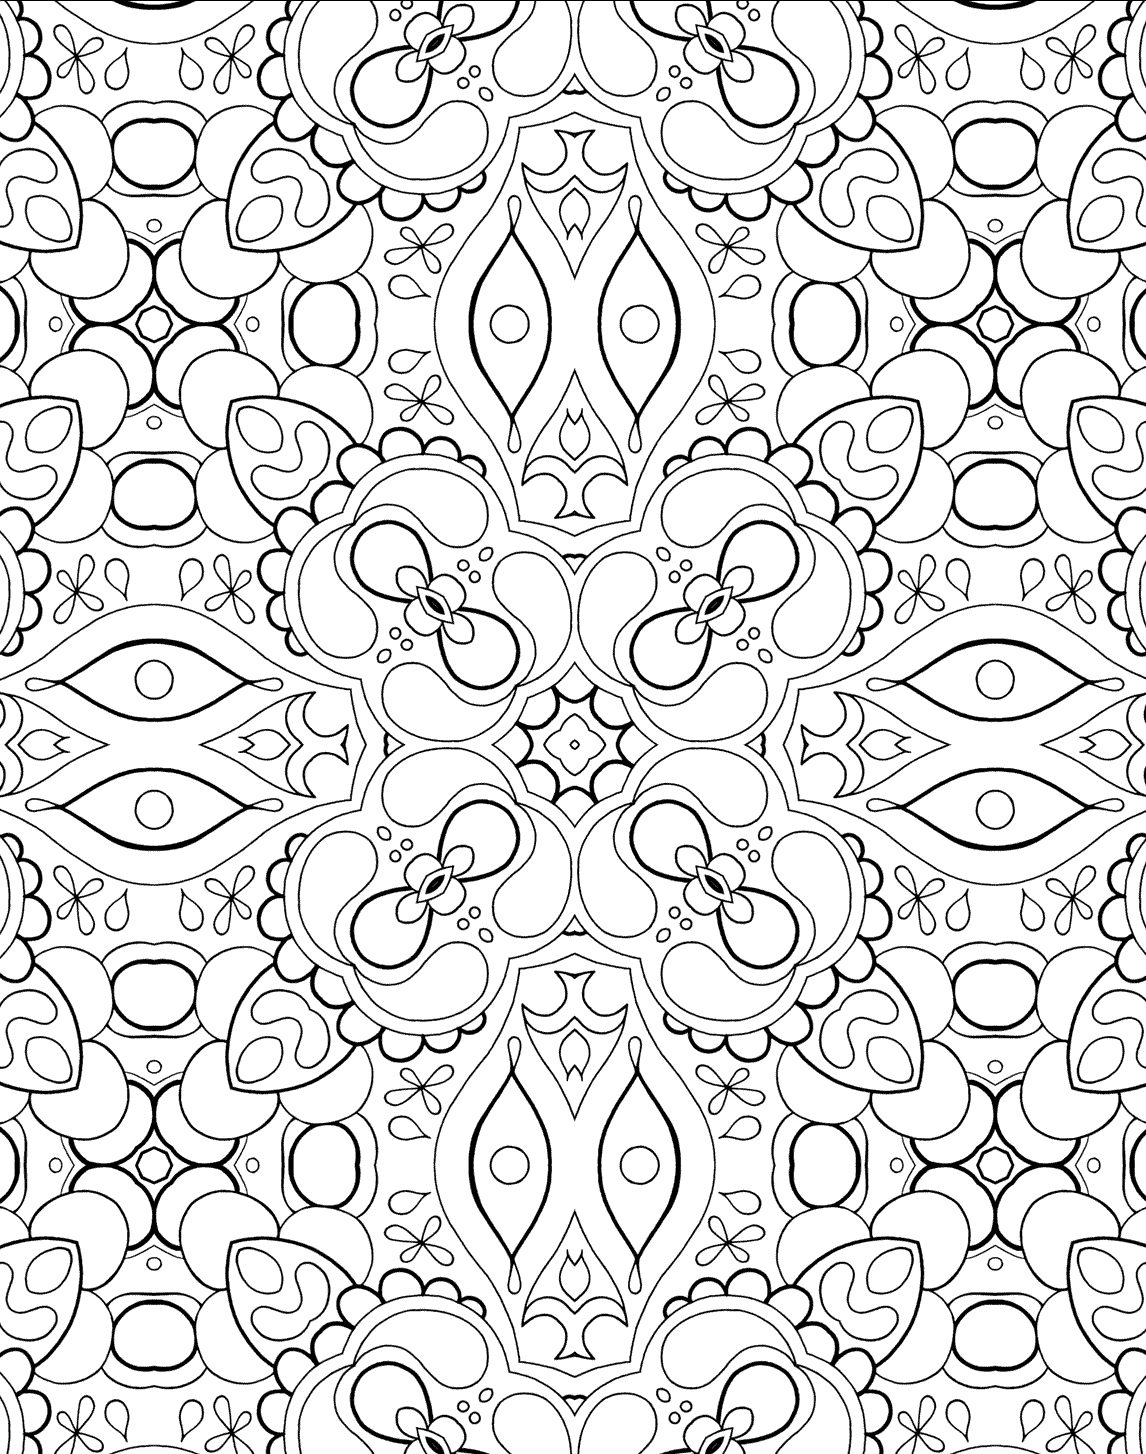 mindfulness-coloring-pages-best-coloring-pages-for-kids